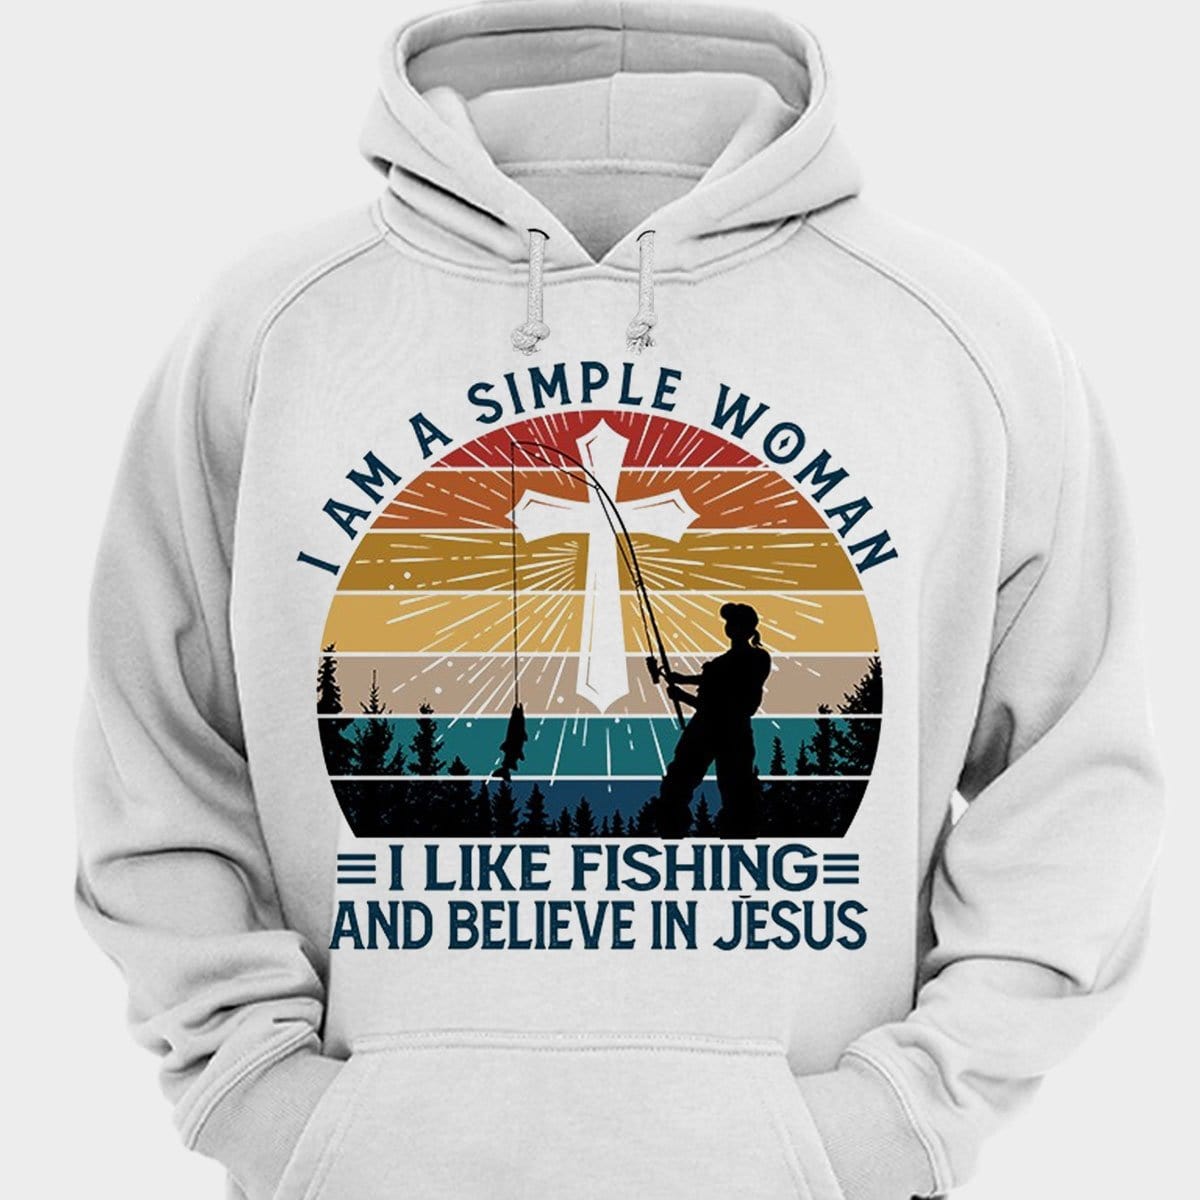 Women's Fishing Shirts, Hoodie I'm A Simple Woman I Like Fishing and Believe in Jesus Vintage Fishing T Shirts